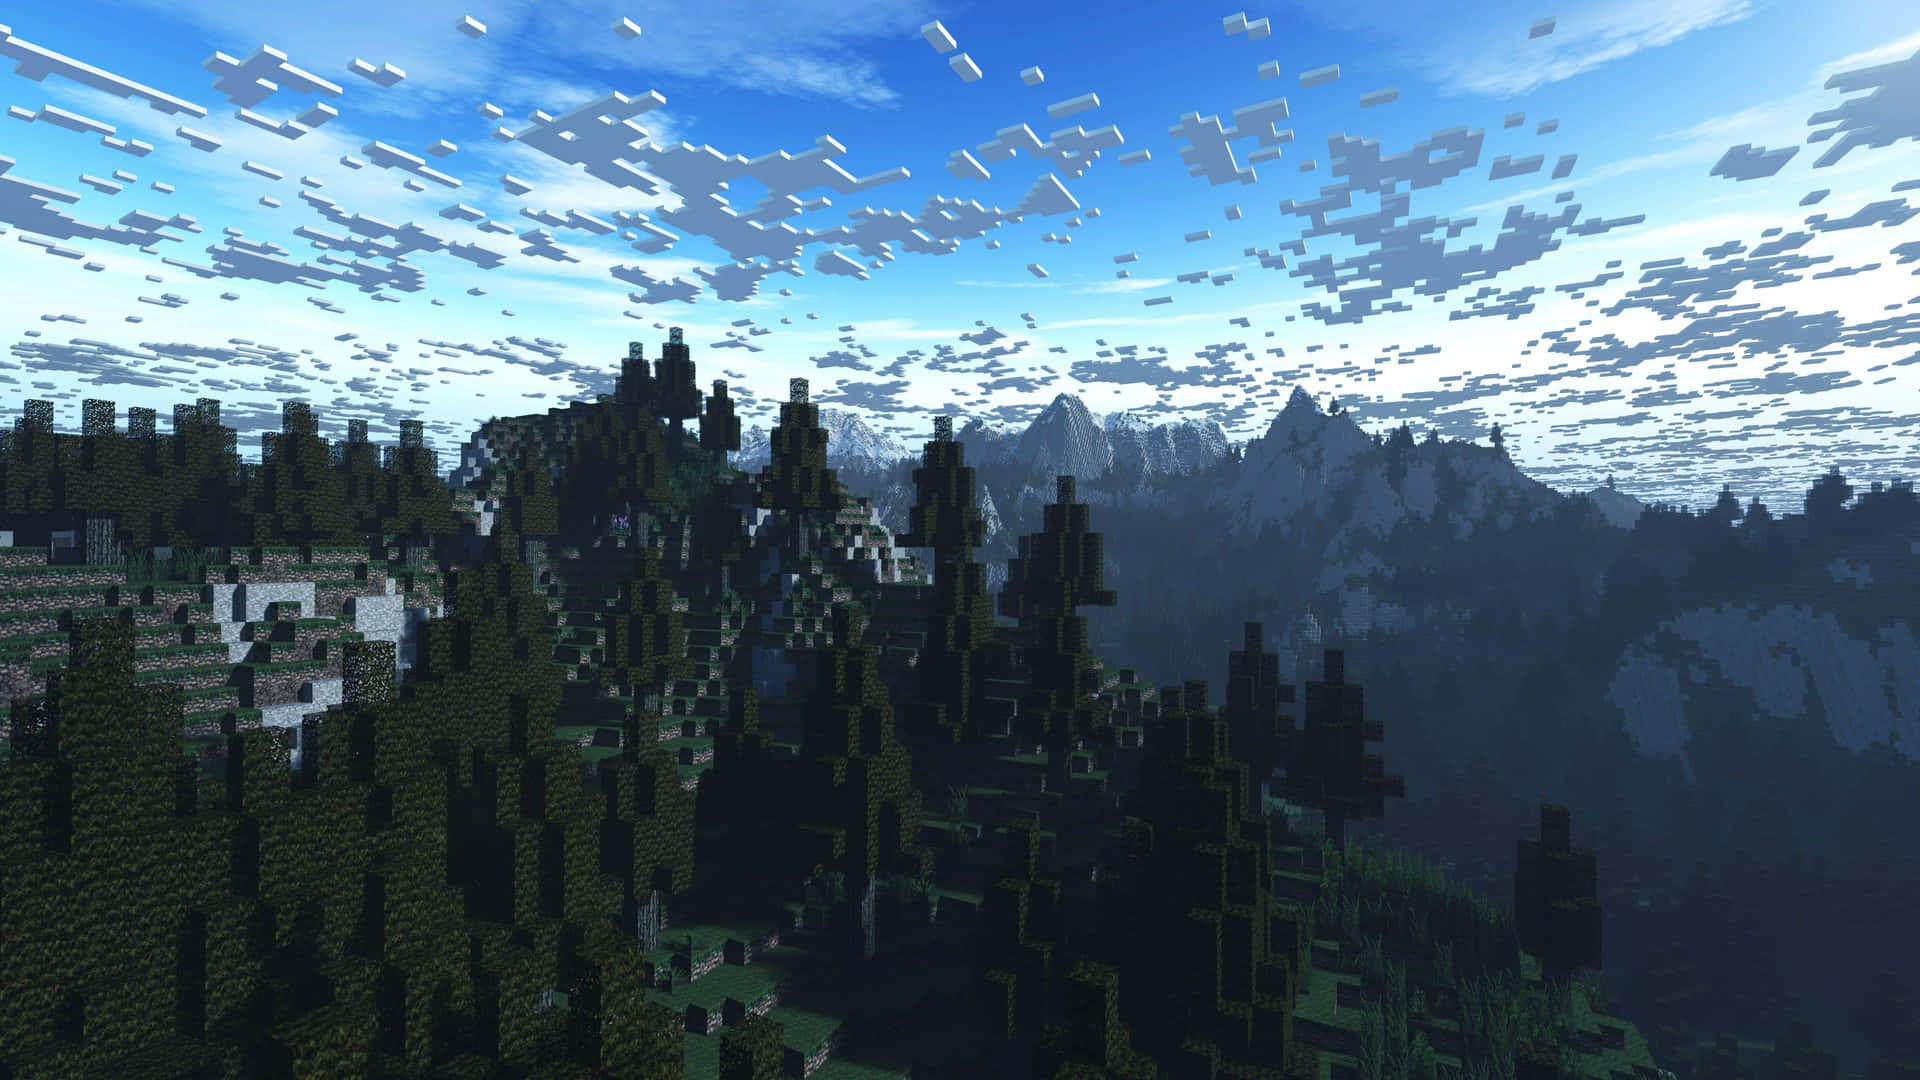 A Cool Minecraft Background - Bring Your Awesome Creations to Life!